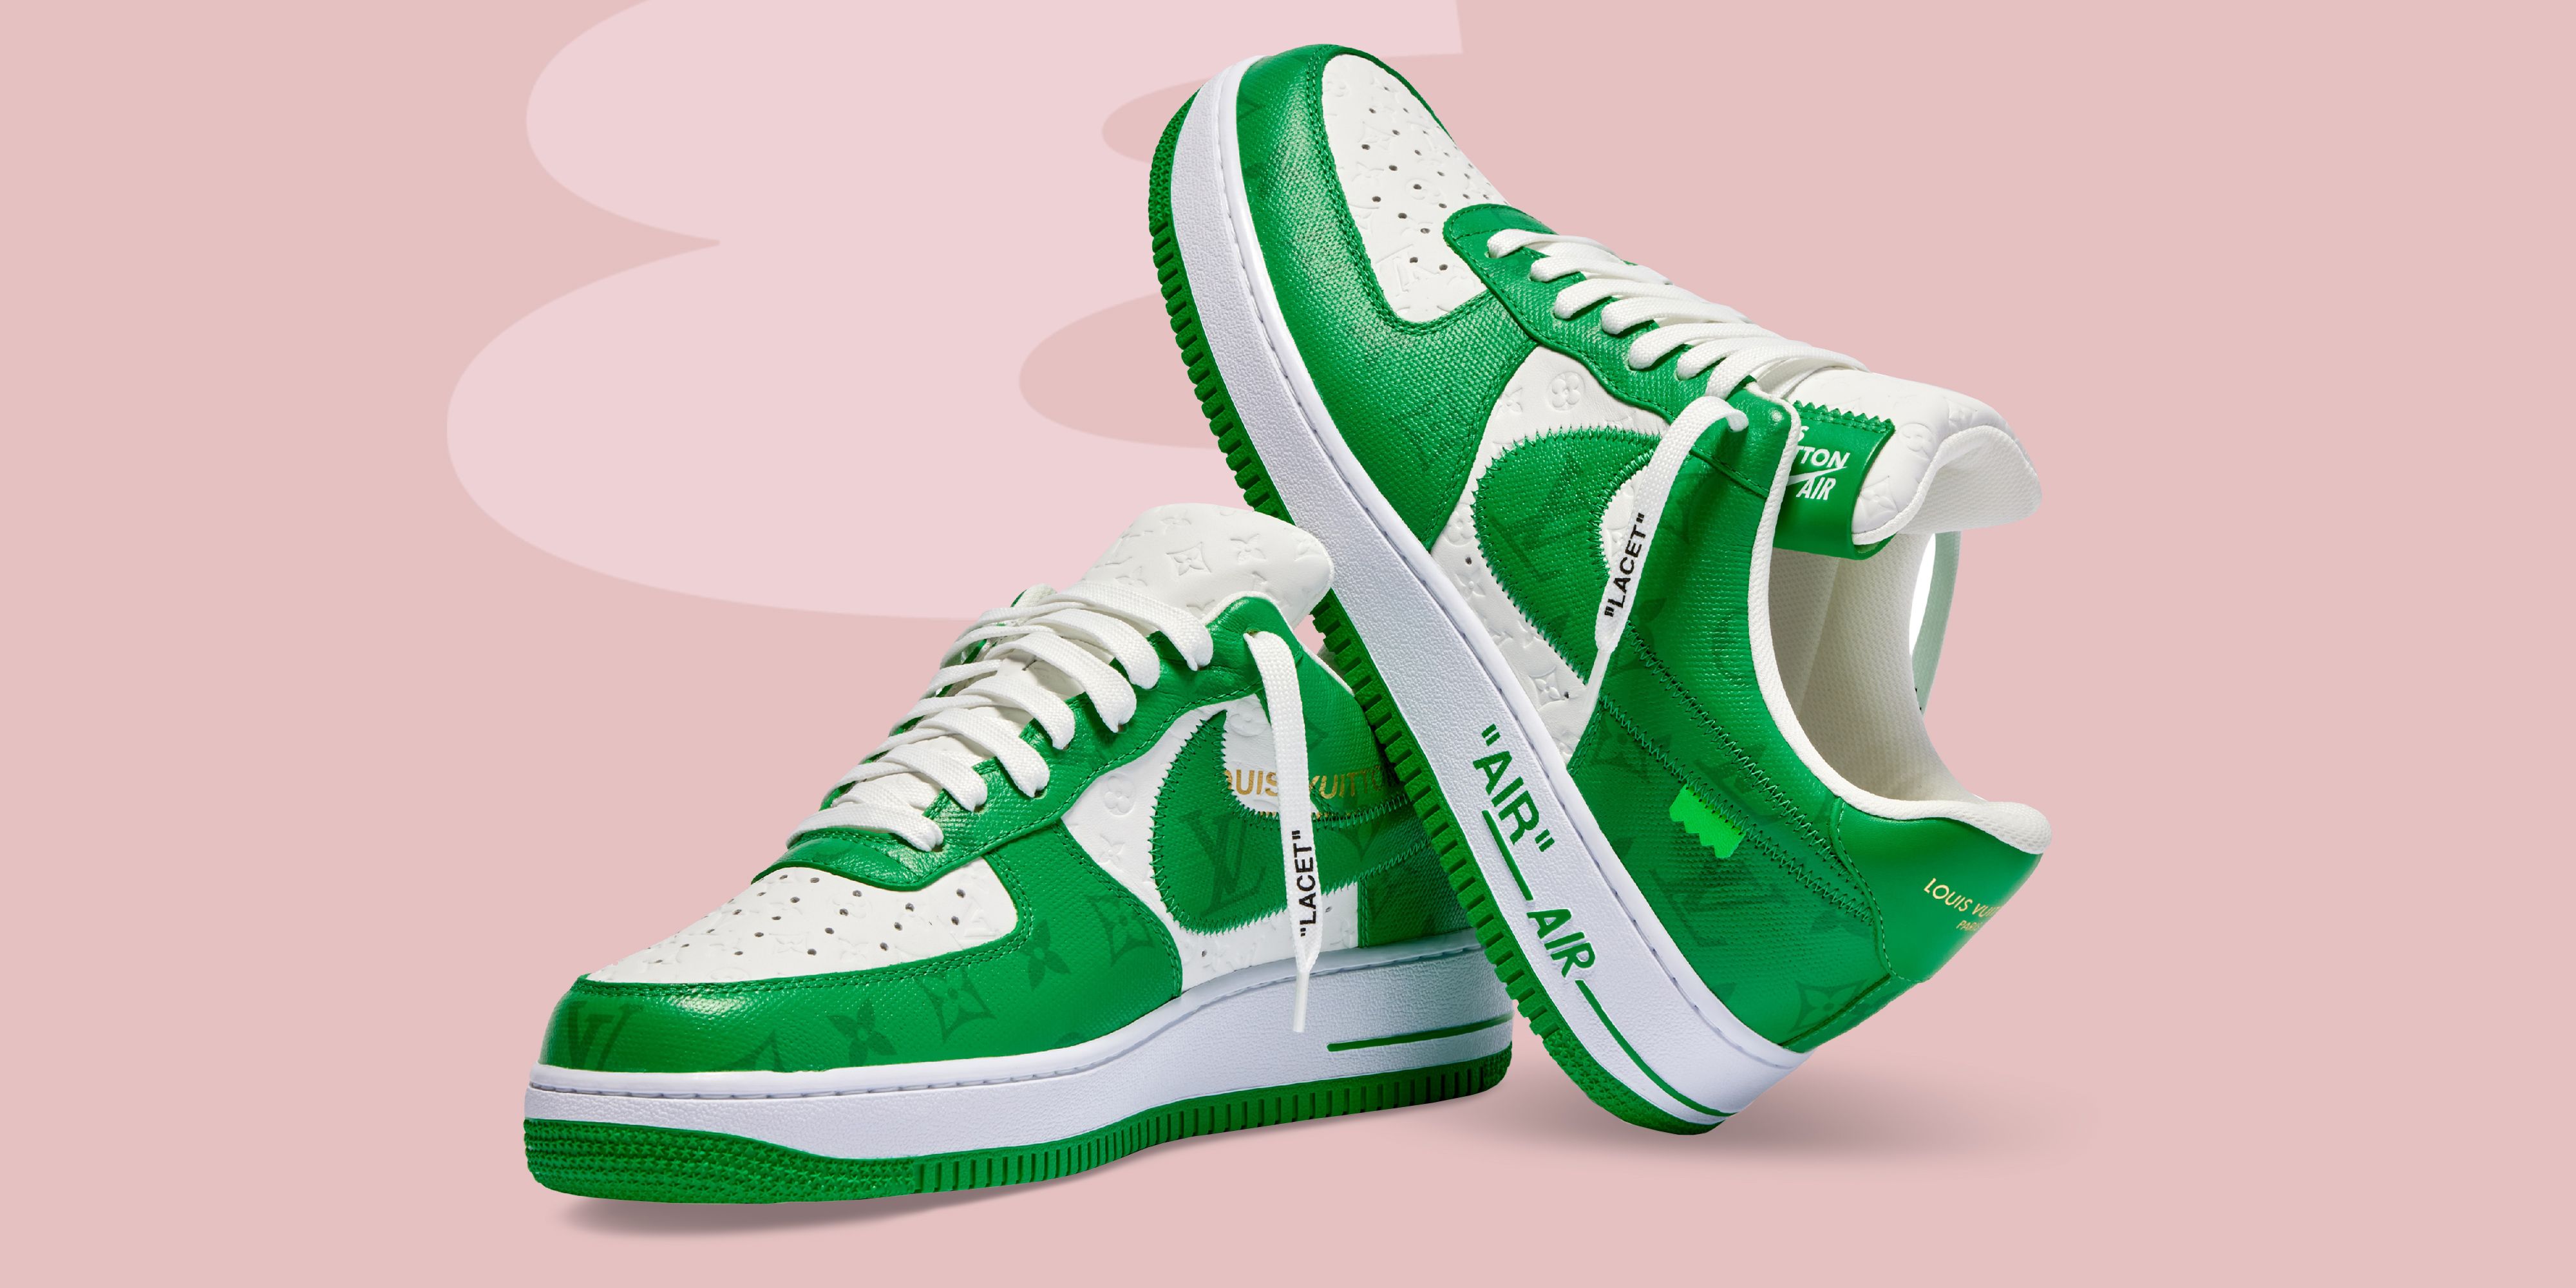 The Best Nike Sneakers By Decade by Stephen Cheetham | Sneakers  illustration, Nike design, Sneakers nike